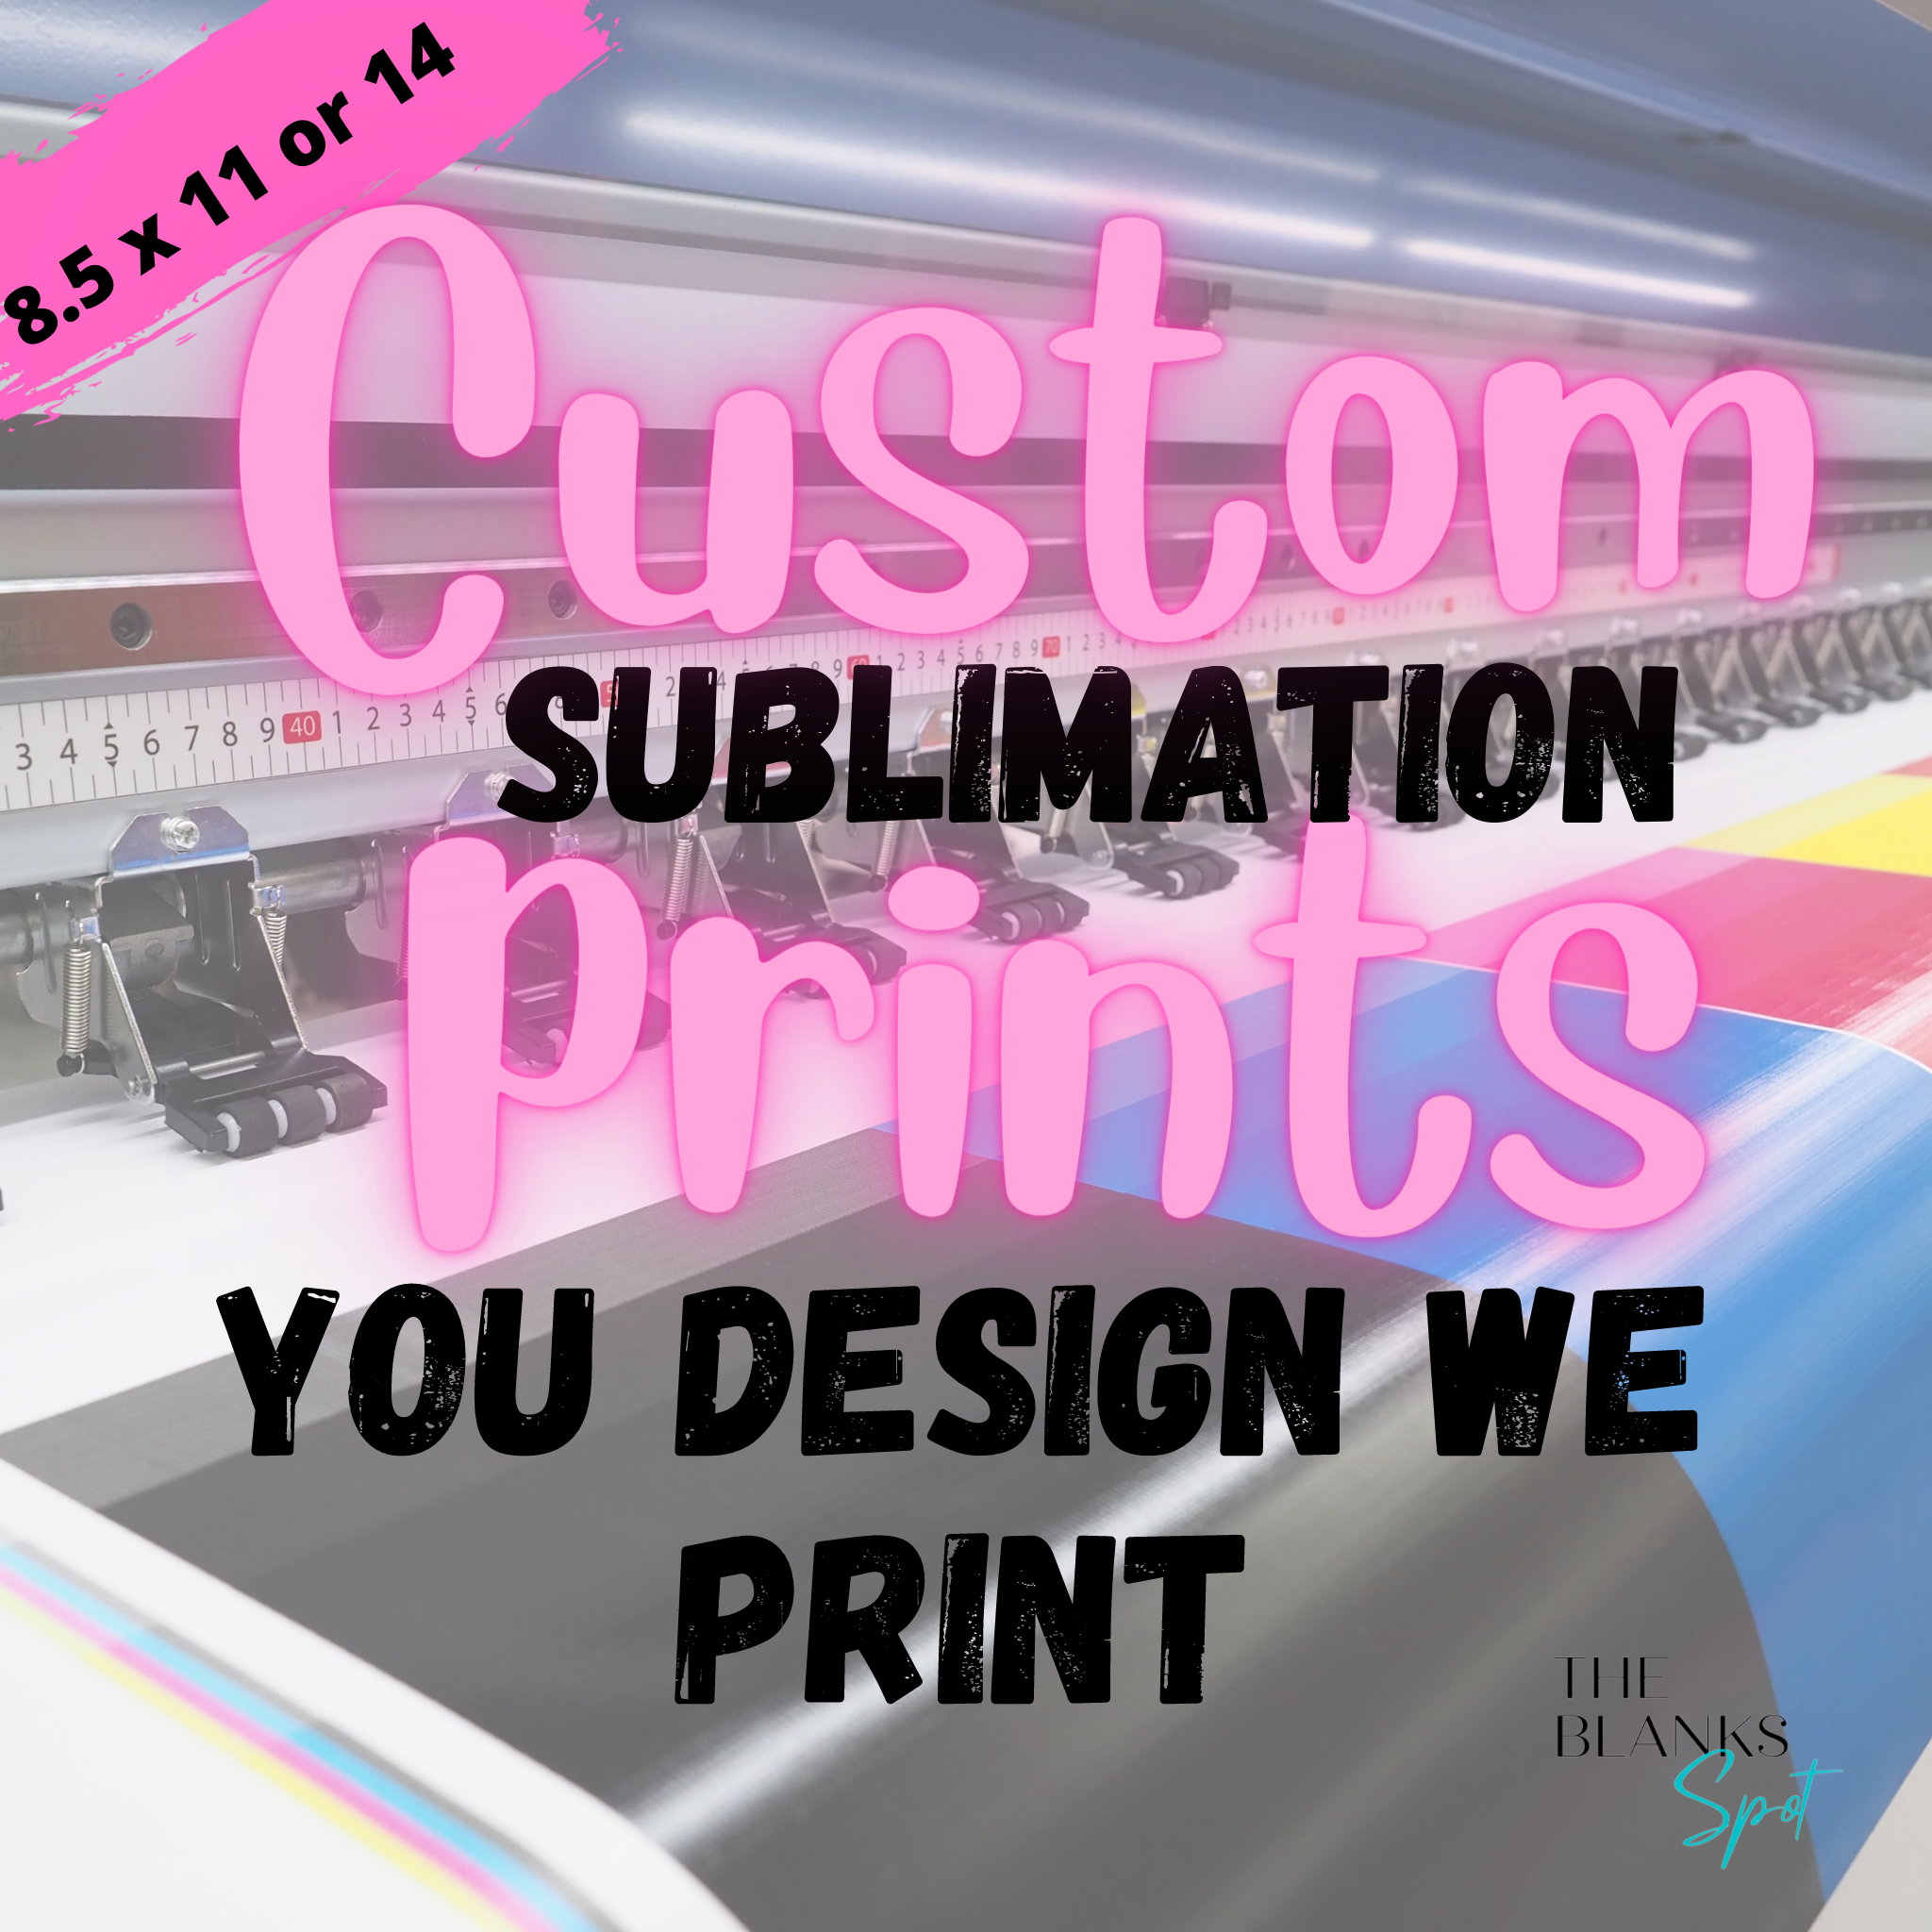 Custom Sublimation Print(s) 8.5 x 11 or 8.5 x 14 Sheet (Non-Tacky) For All Substrates